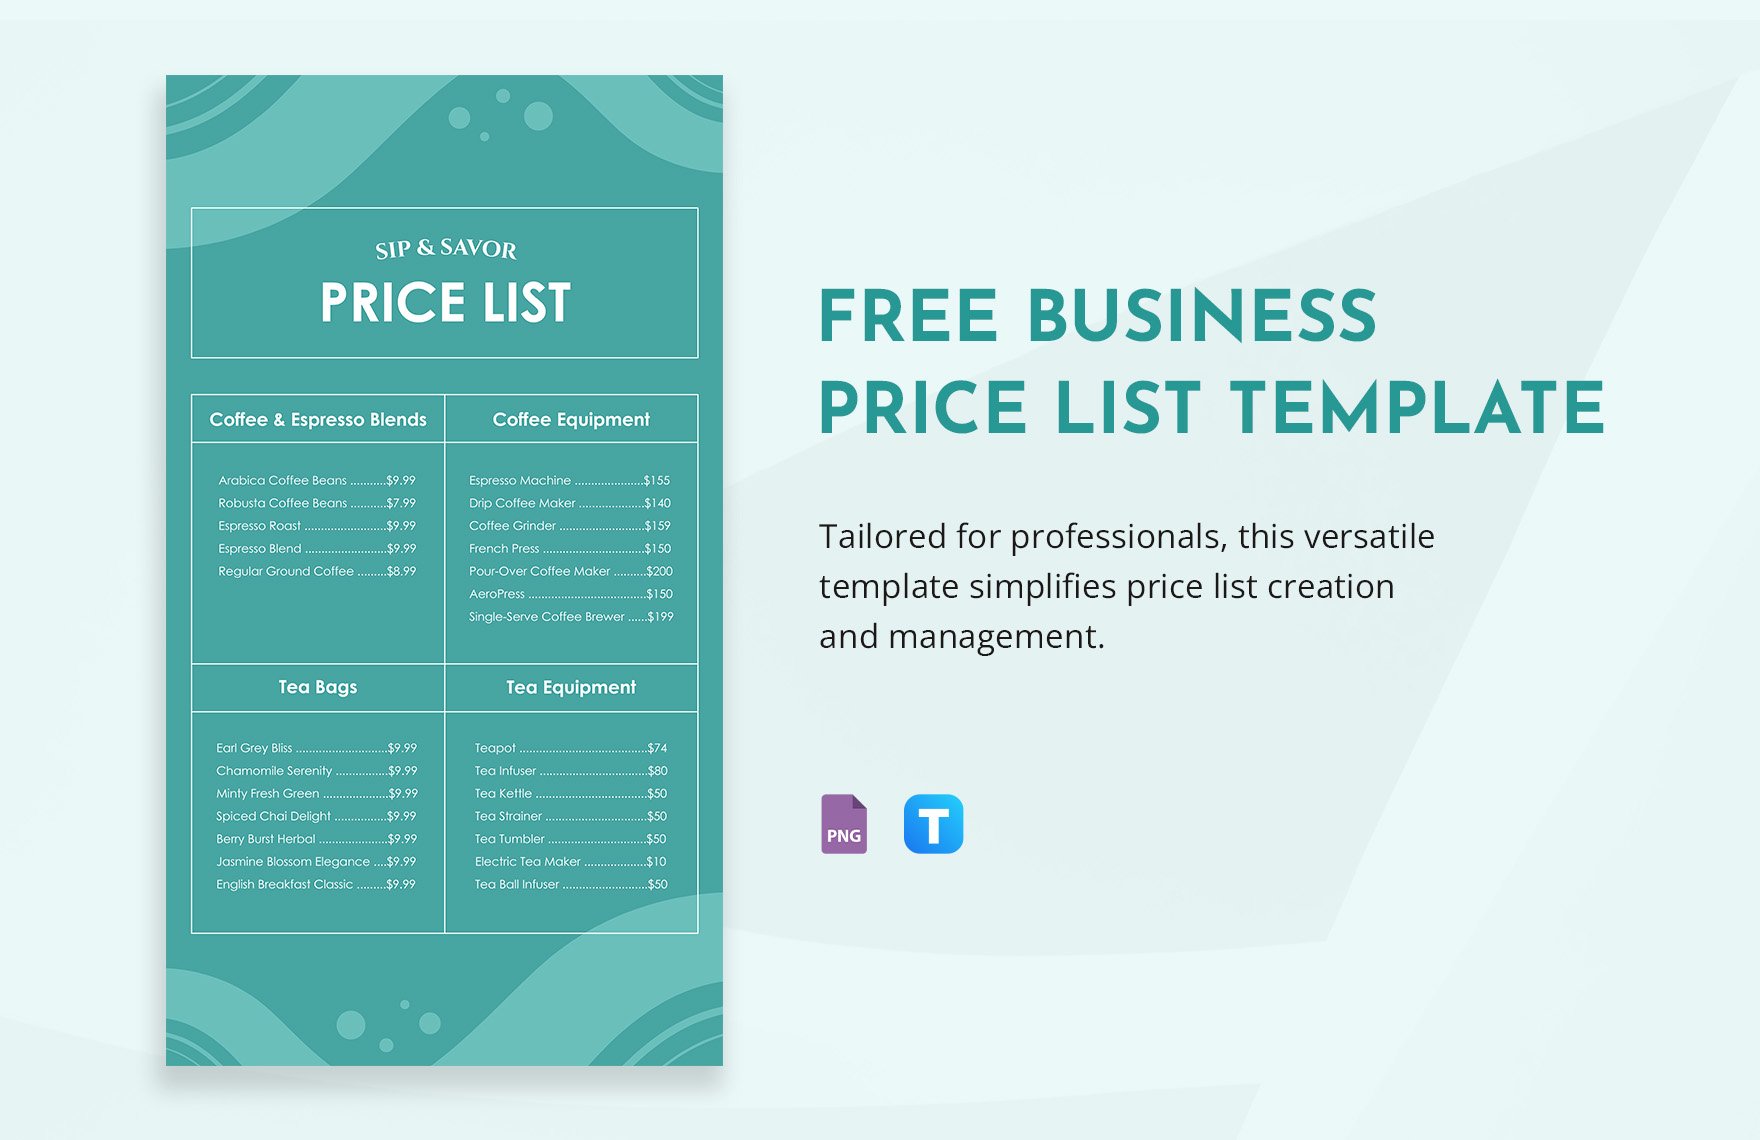 Free Business Pricelist Template in PNG